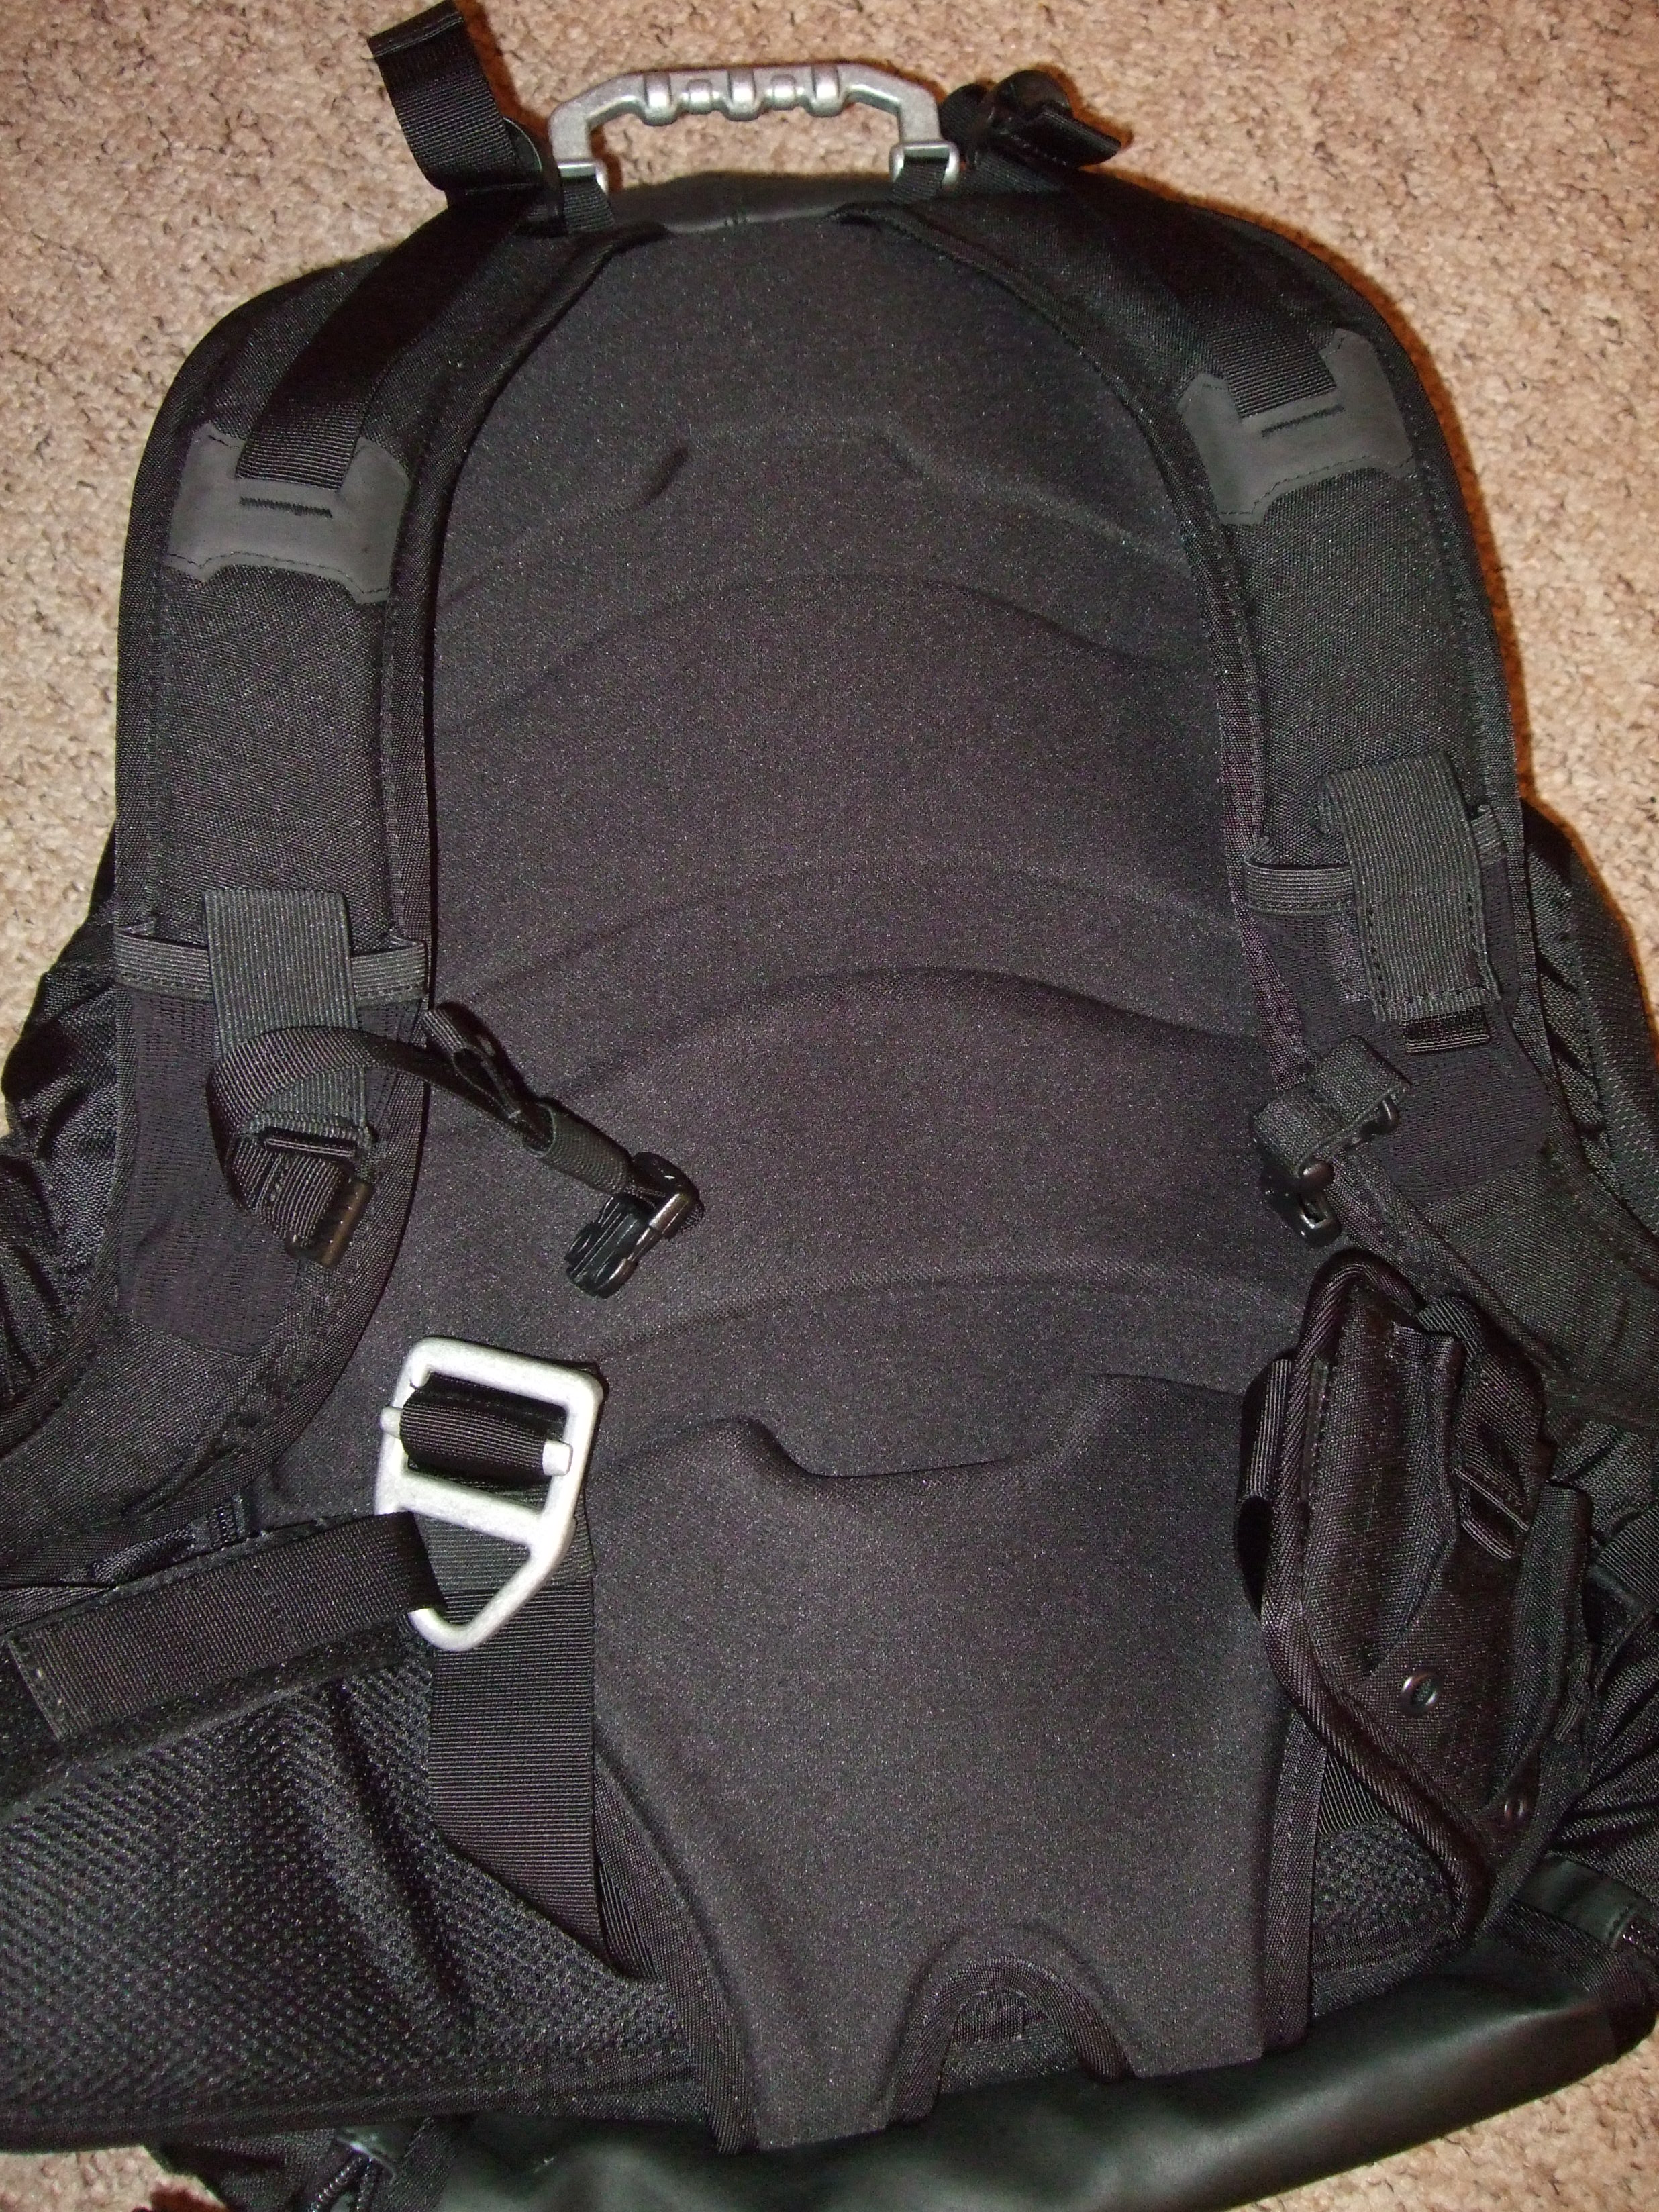 kitchen sink backpack review